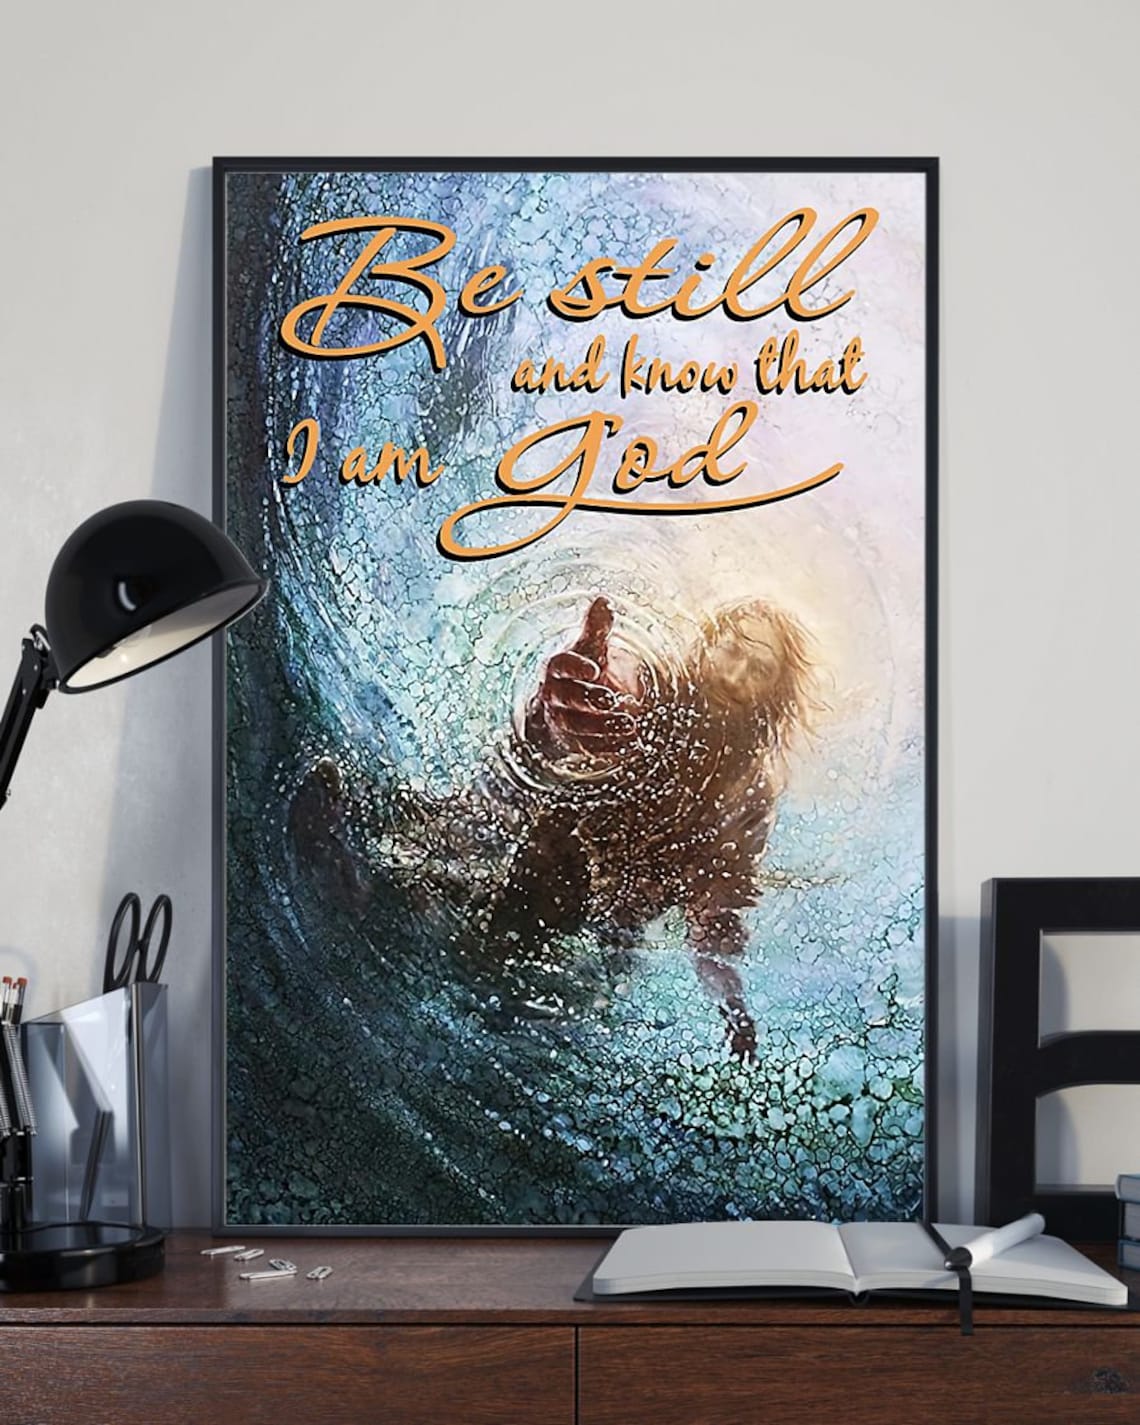 Christian Jesus On Water Be Still And Know That I Am God Wall Art Decor Poster Canvas